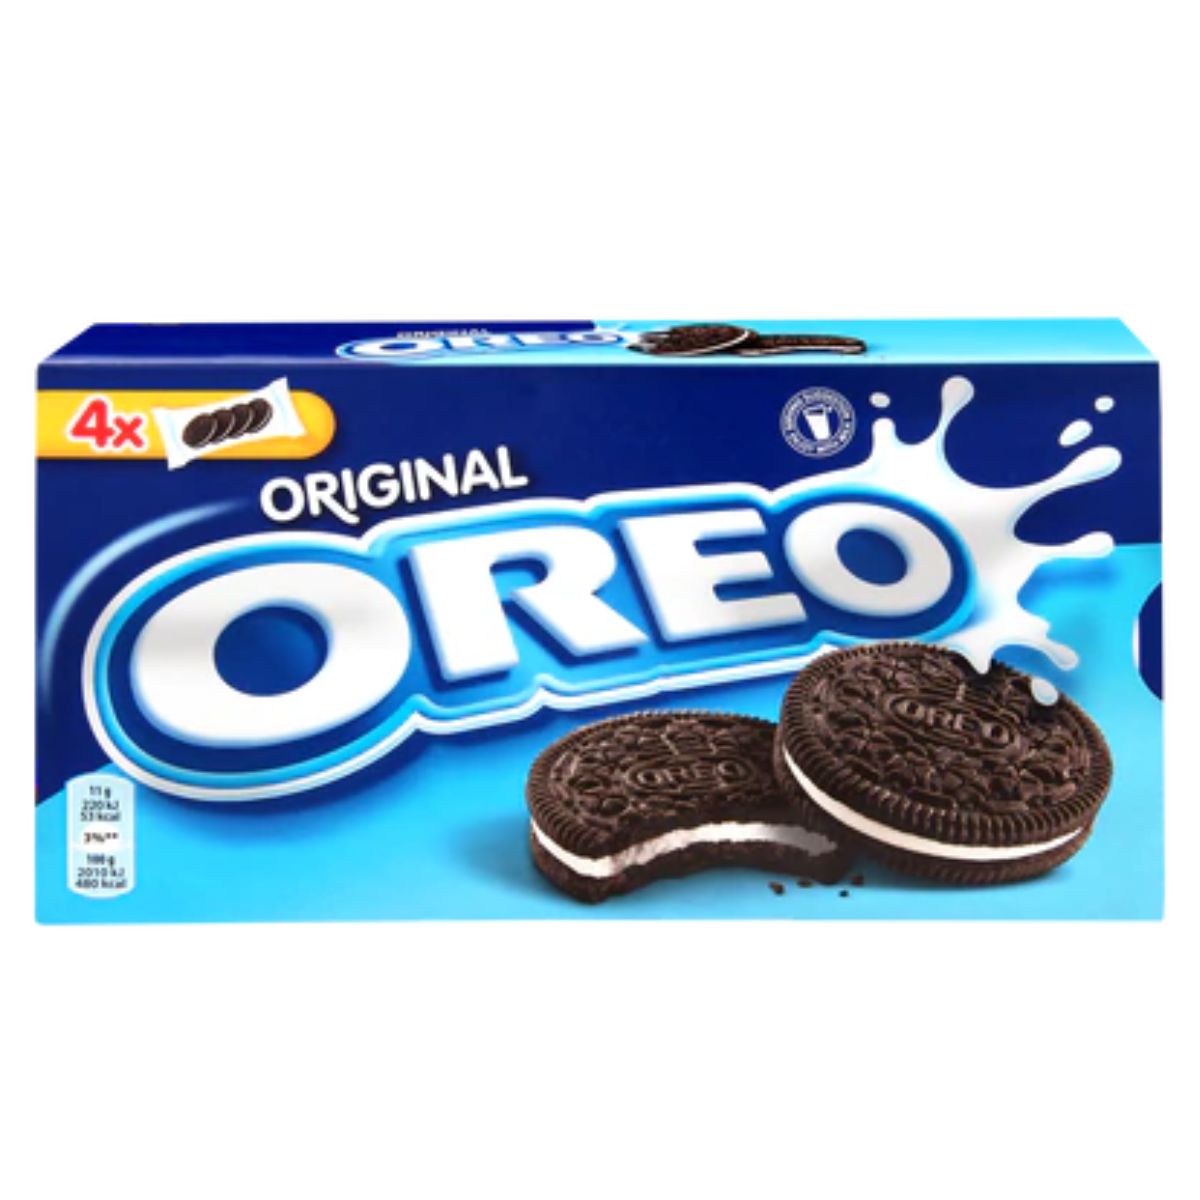 Packaging of Oreo - Original - 176g cookies showing the product and the brand logo.